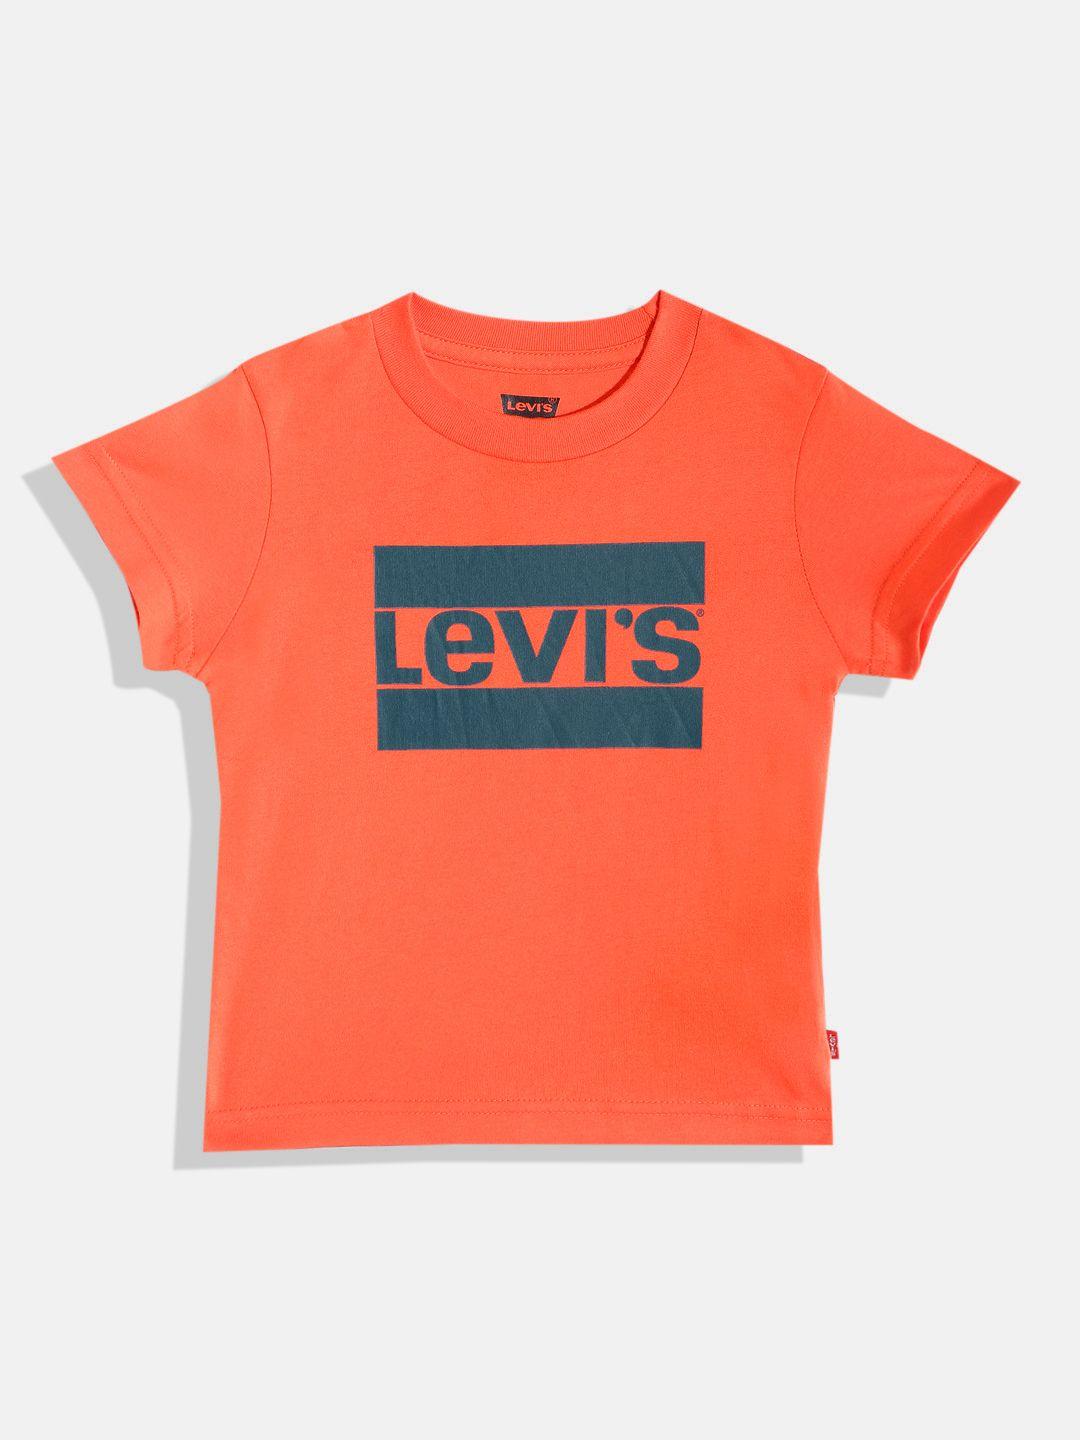 levis boys coral & navy blue pure cotton brand logo printed t-shirt